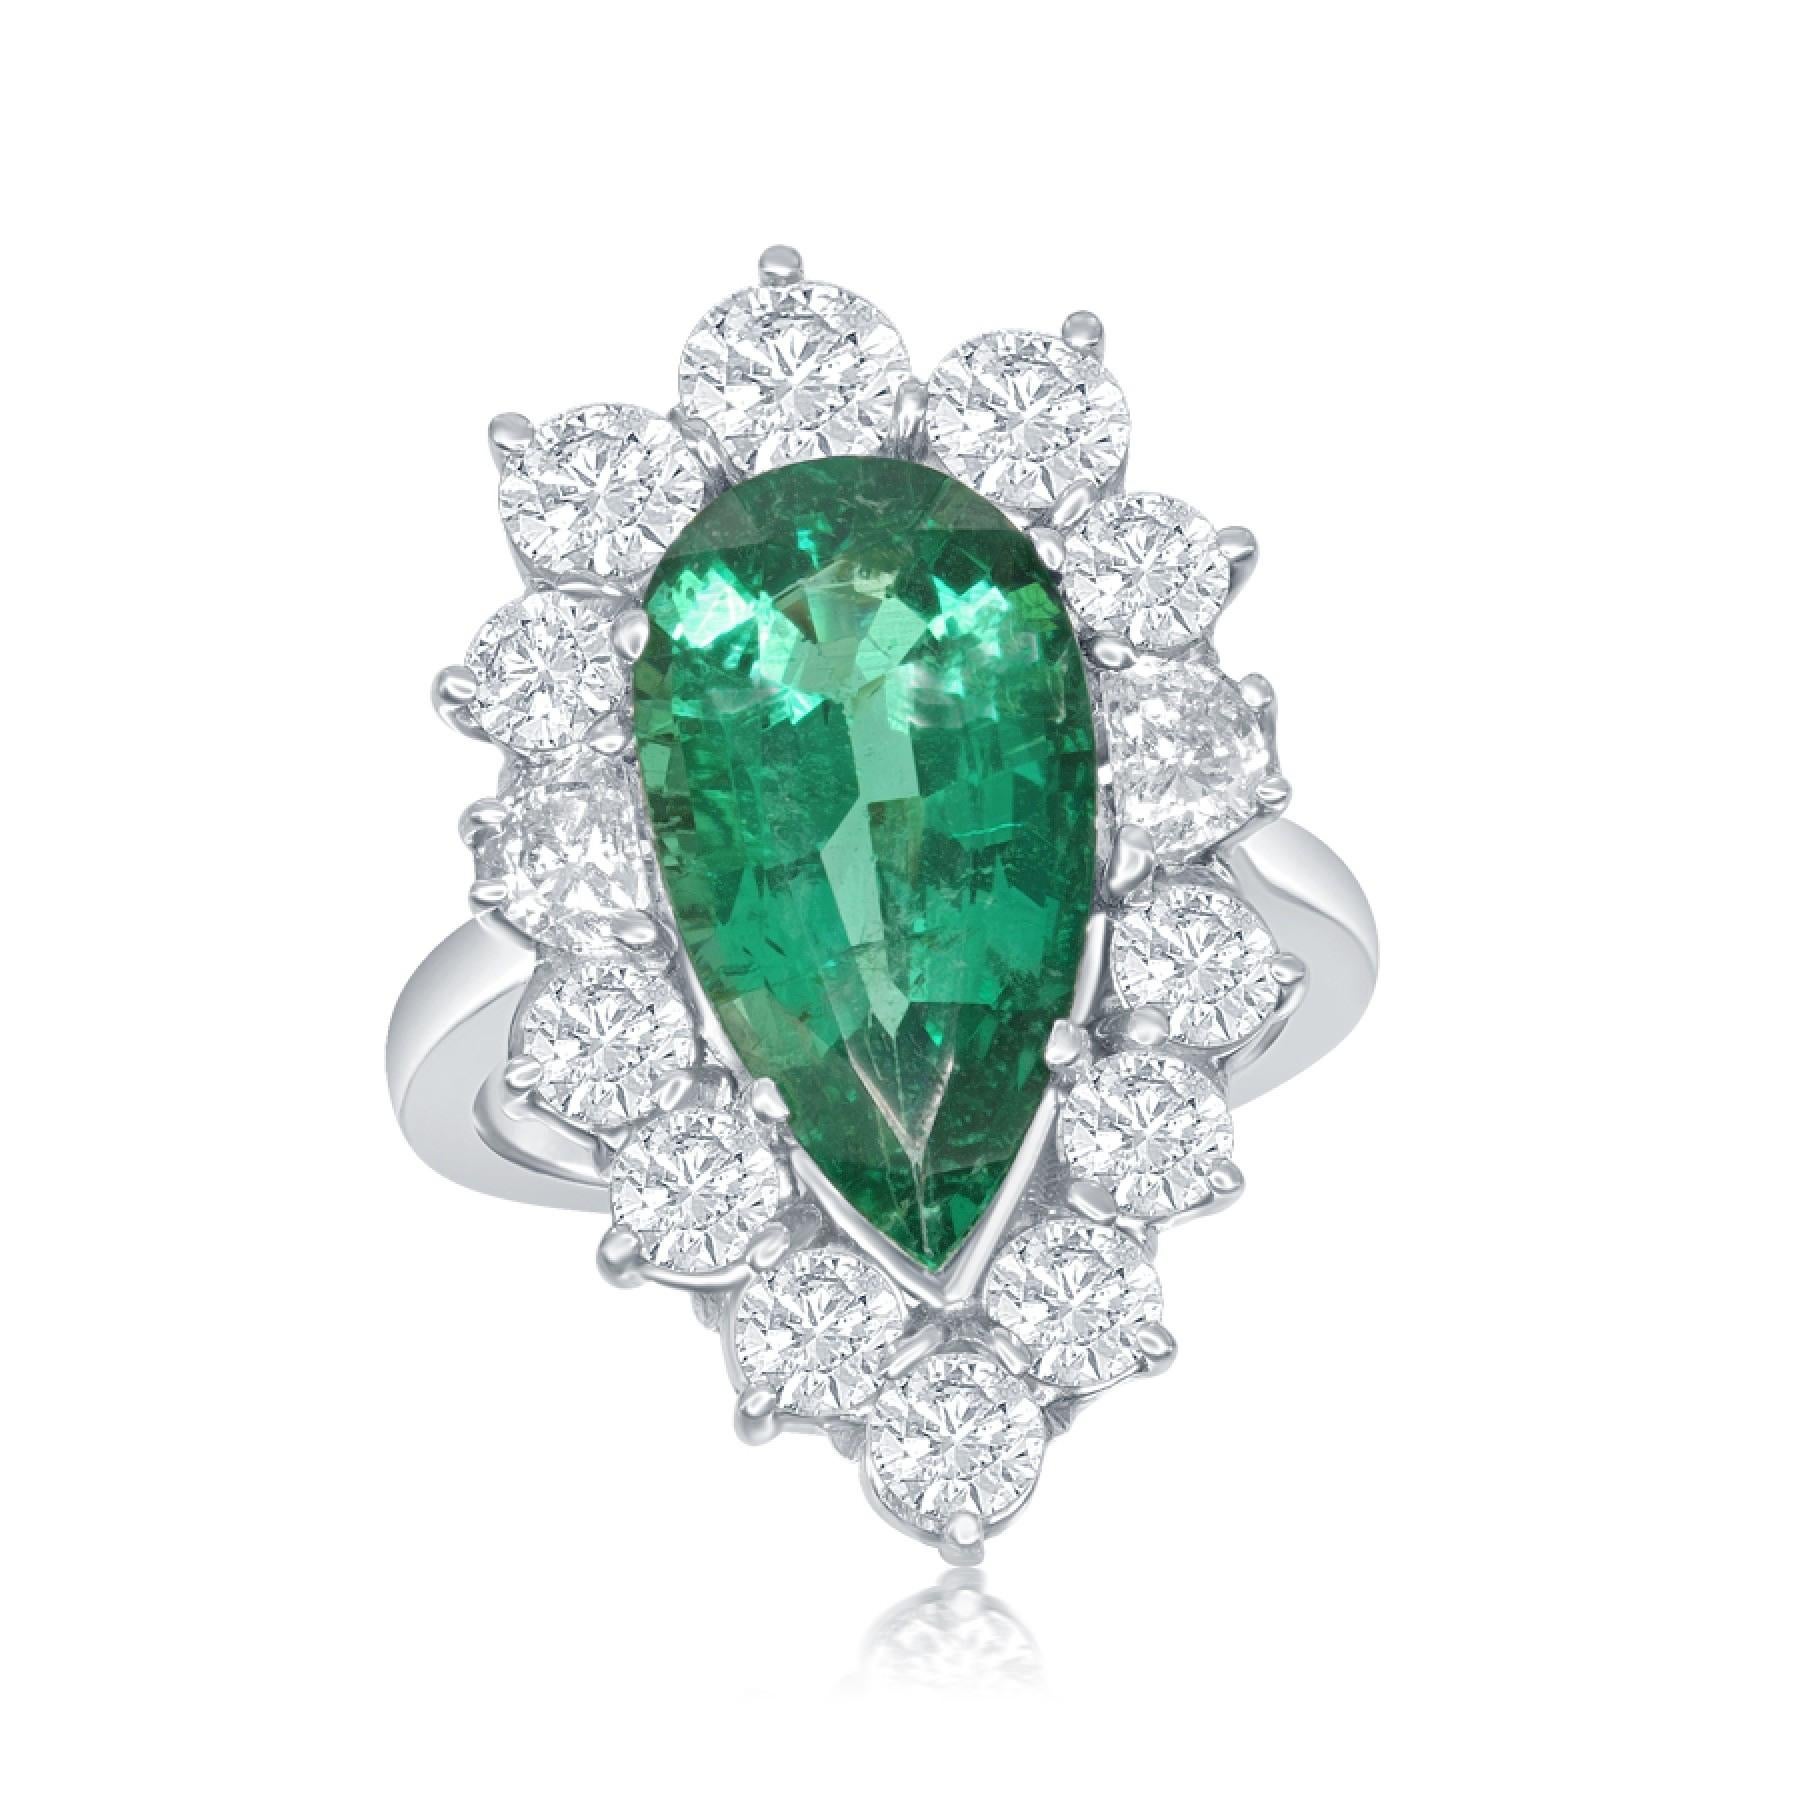 4.57 Carat Pear Shape Emerald with 2.48 Carat of Diamonds Set in Platinum In New Condition For Sale In New Orleans, LA